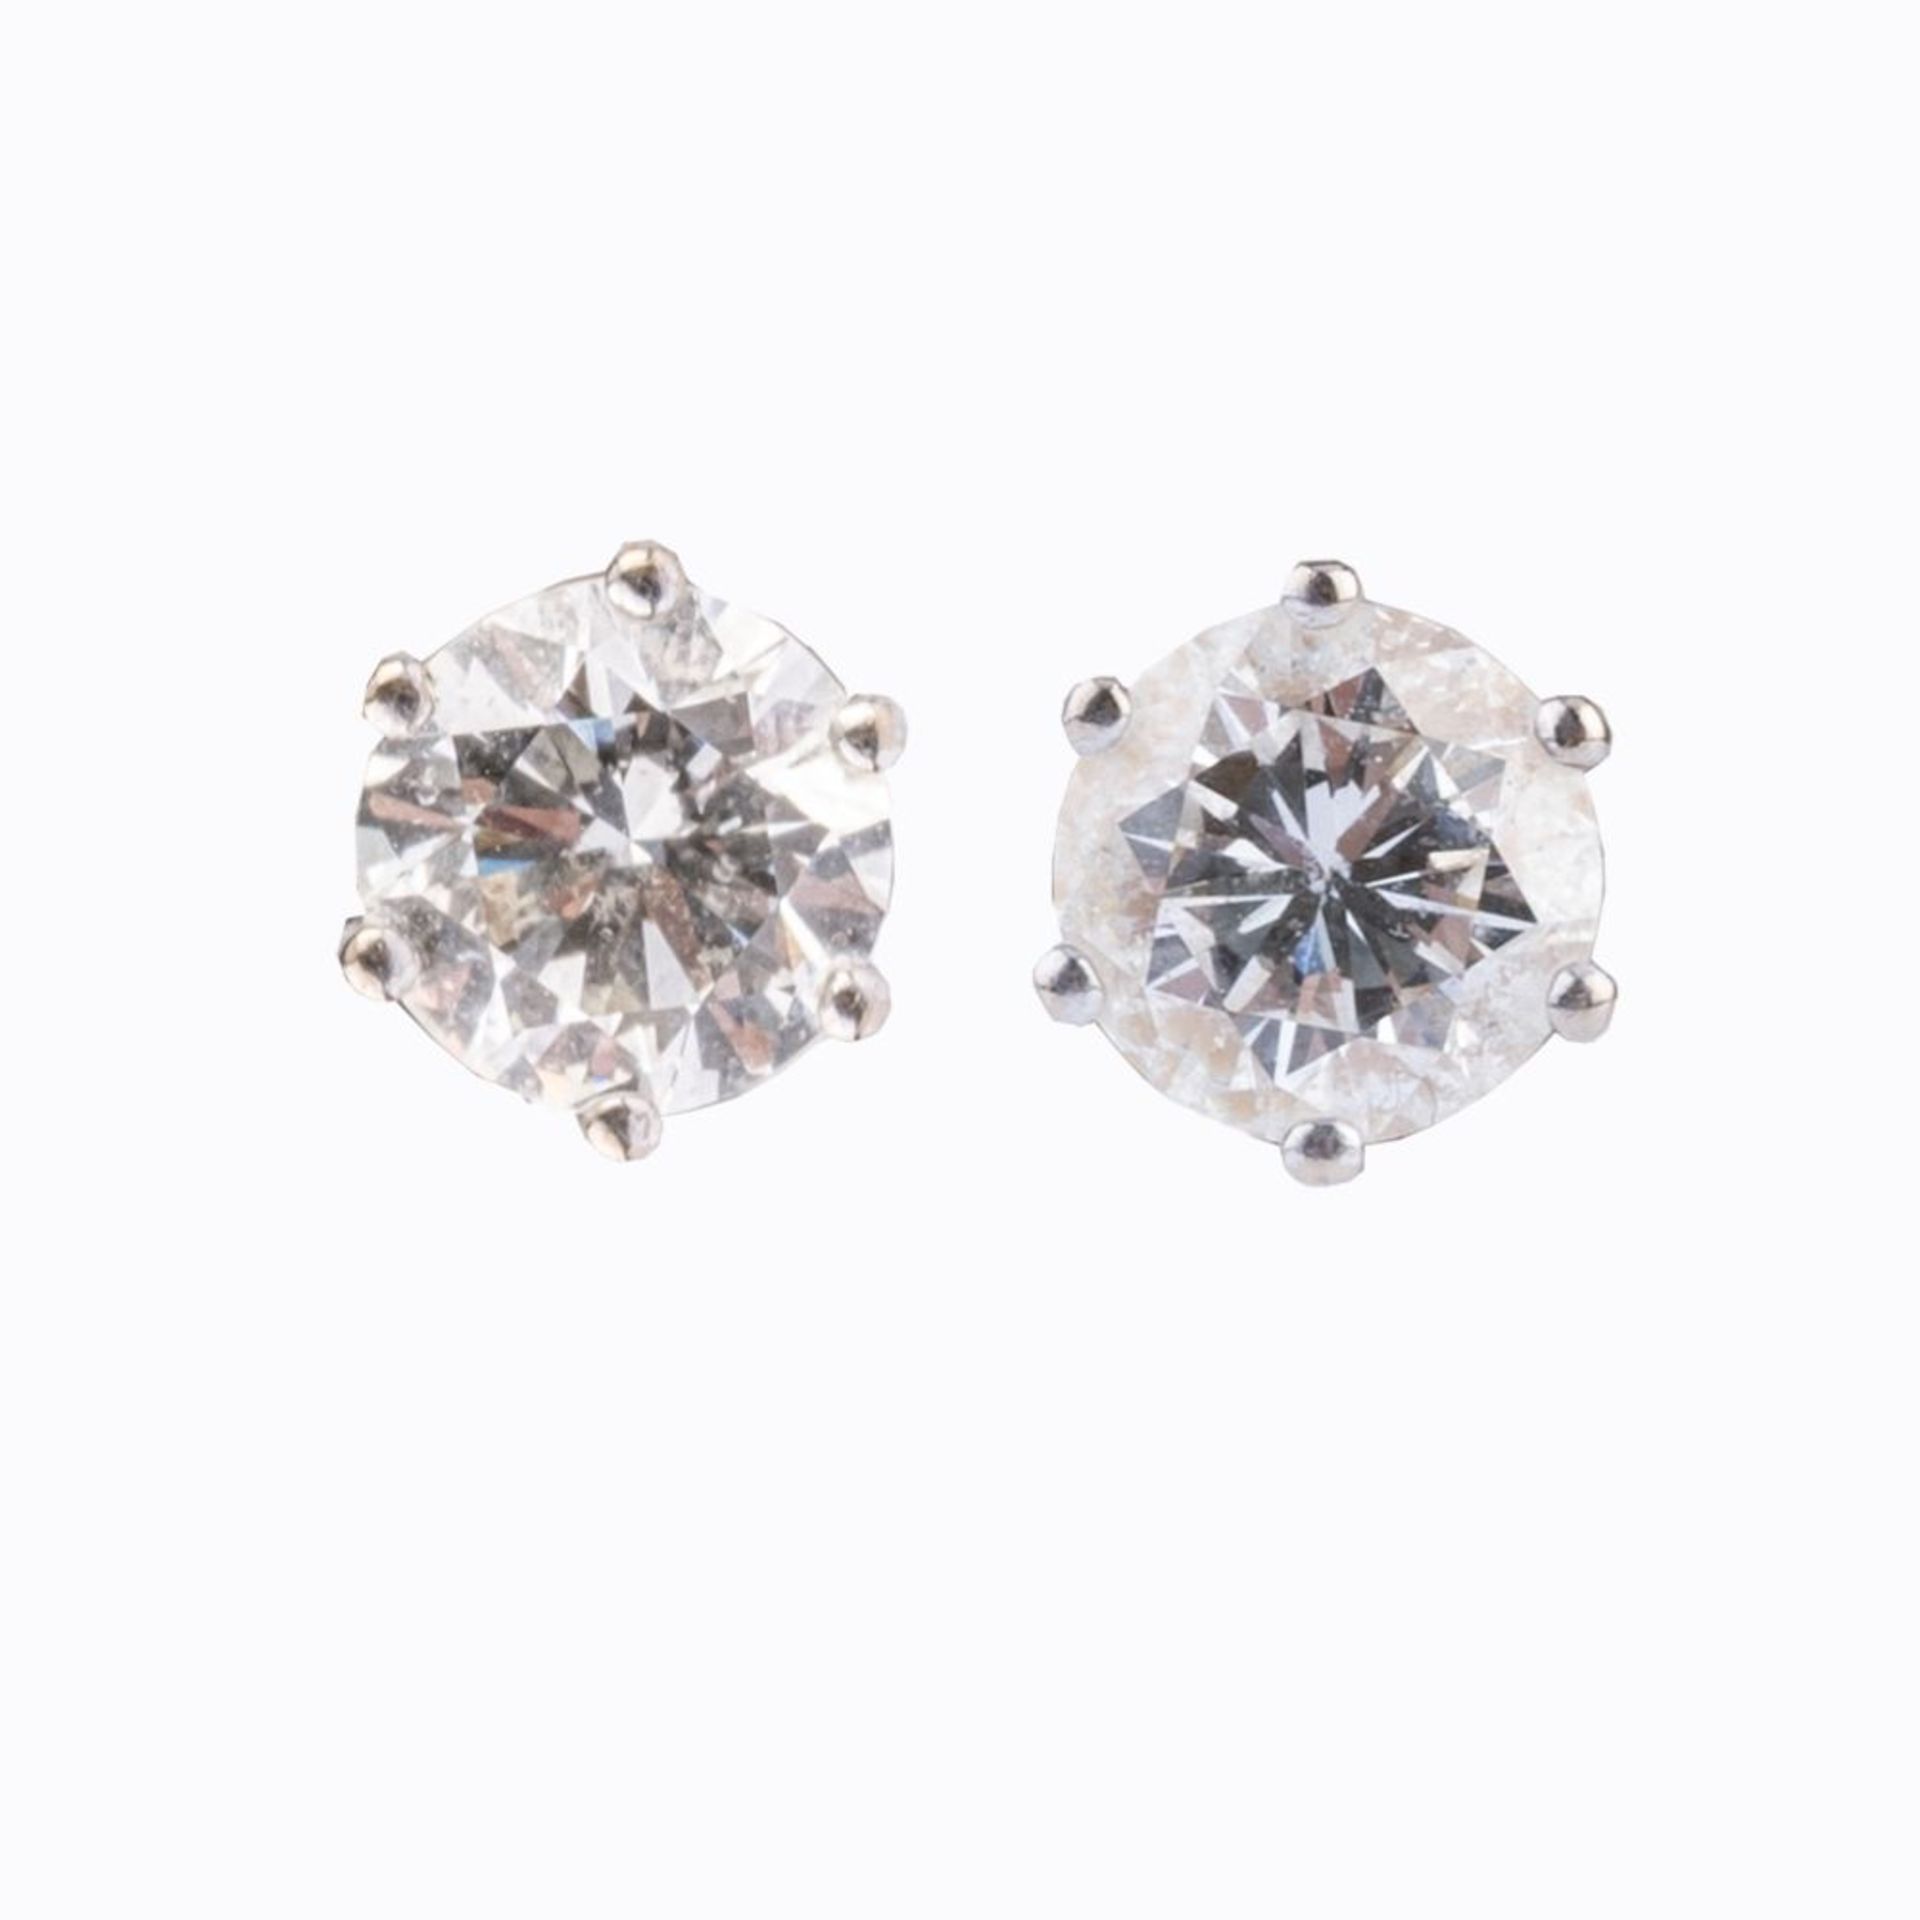 A Pair of Solitaire Earstuds.